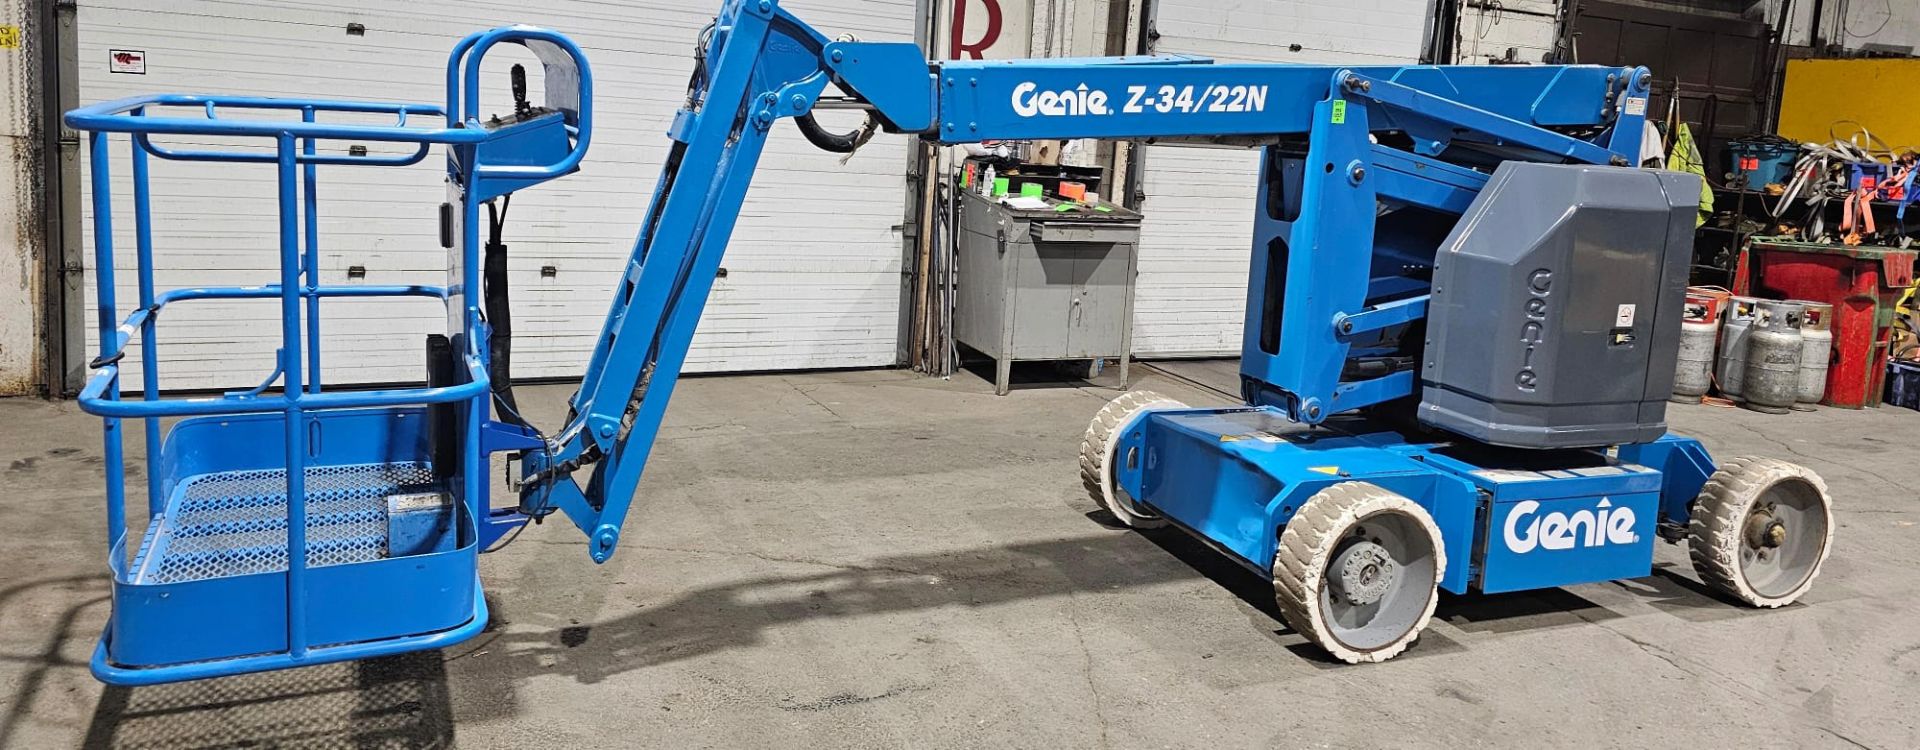 Genie Boom Lift Model Z34N 500lbs 2 person Capacity INDOOR/OUTDOOR Electric 48V 34 ft platform - Image 4 of 10